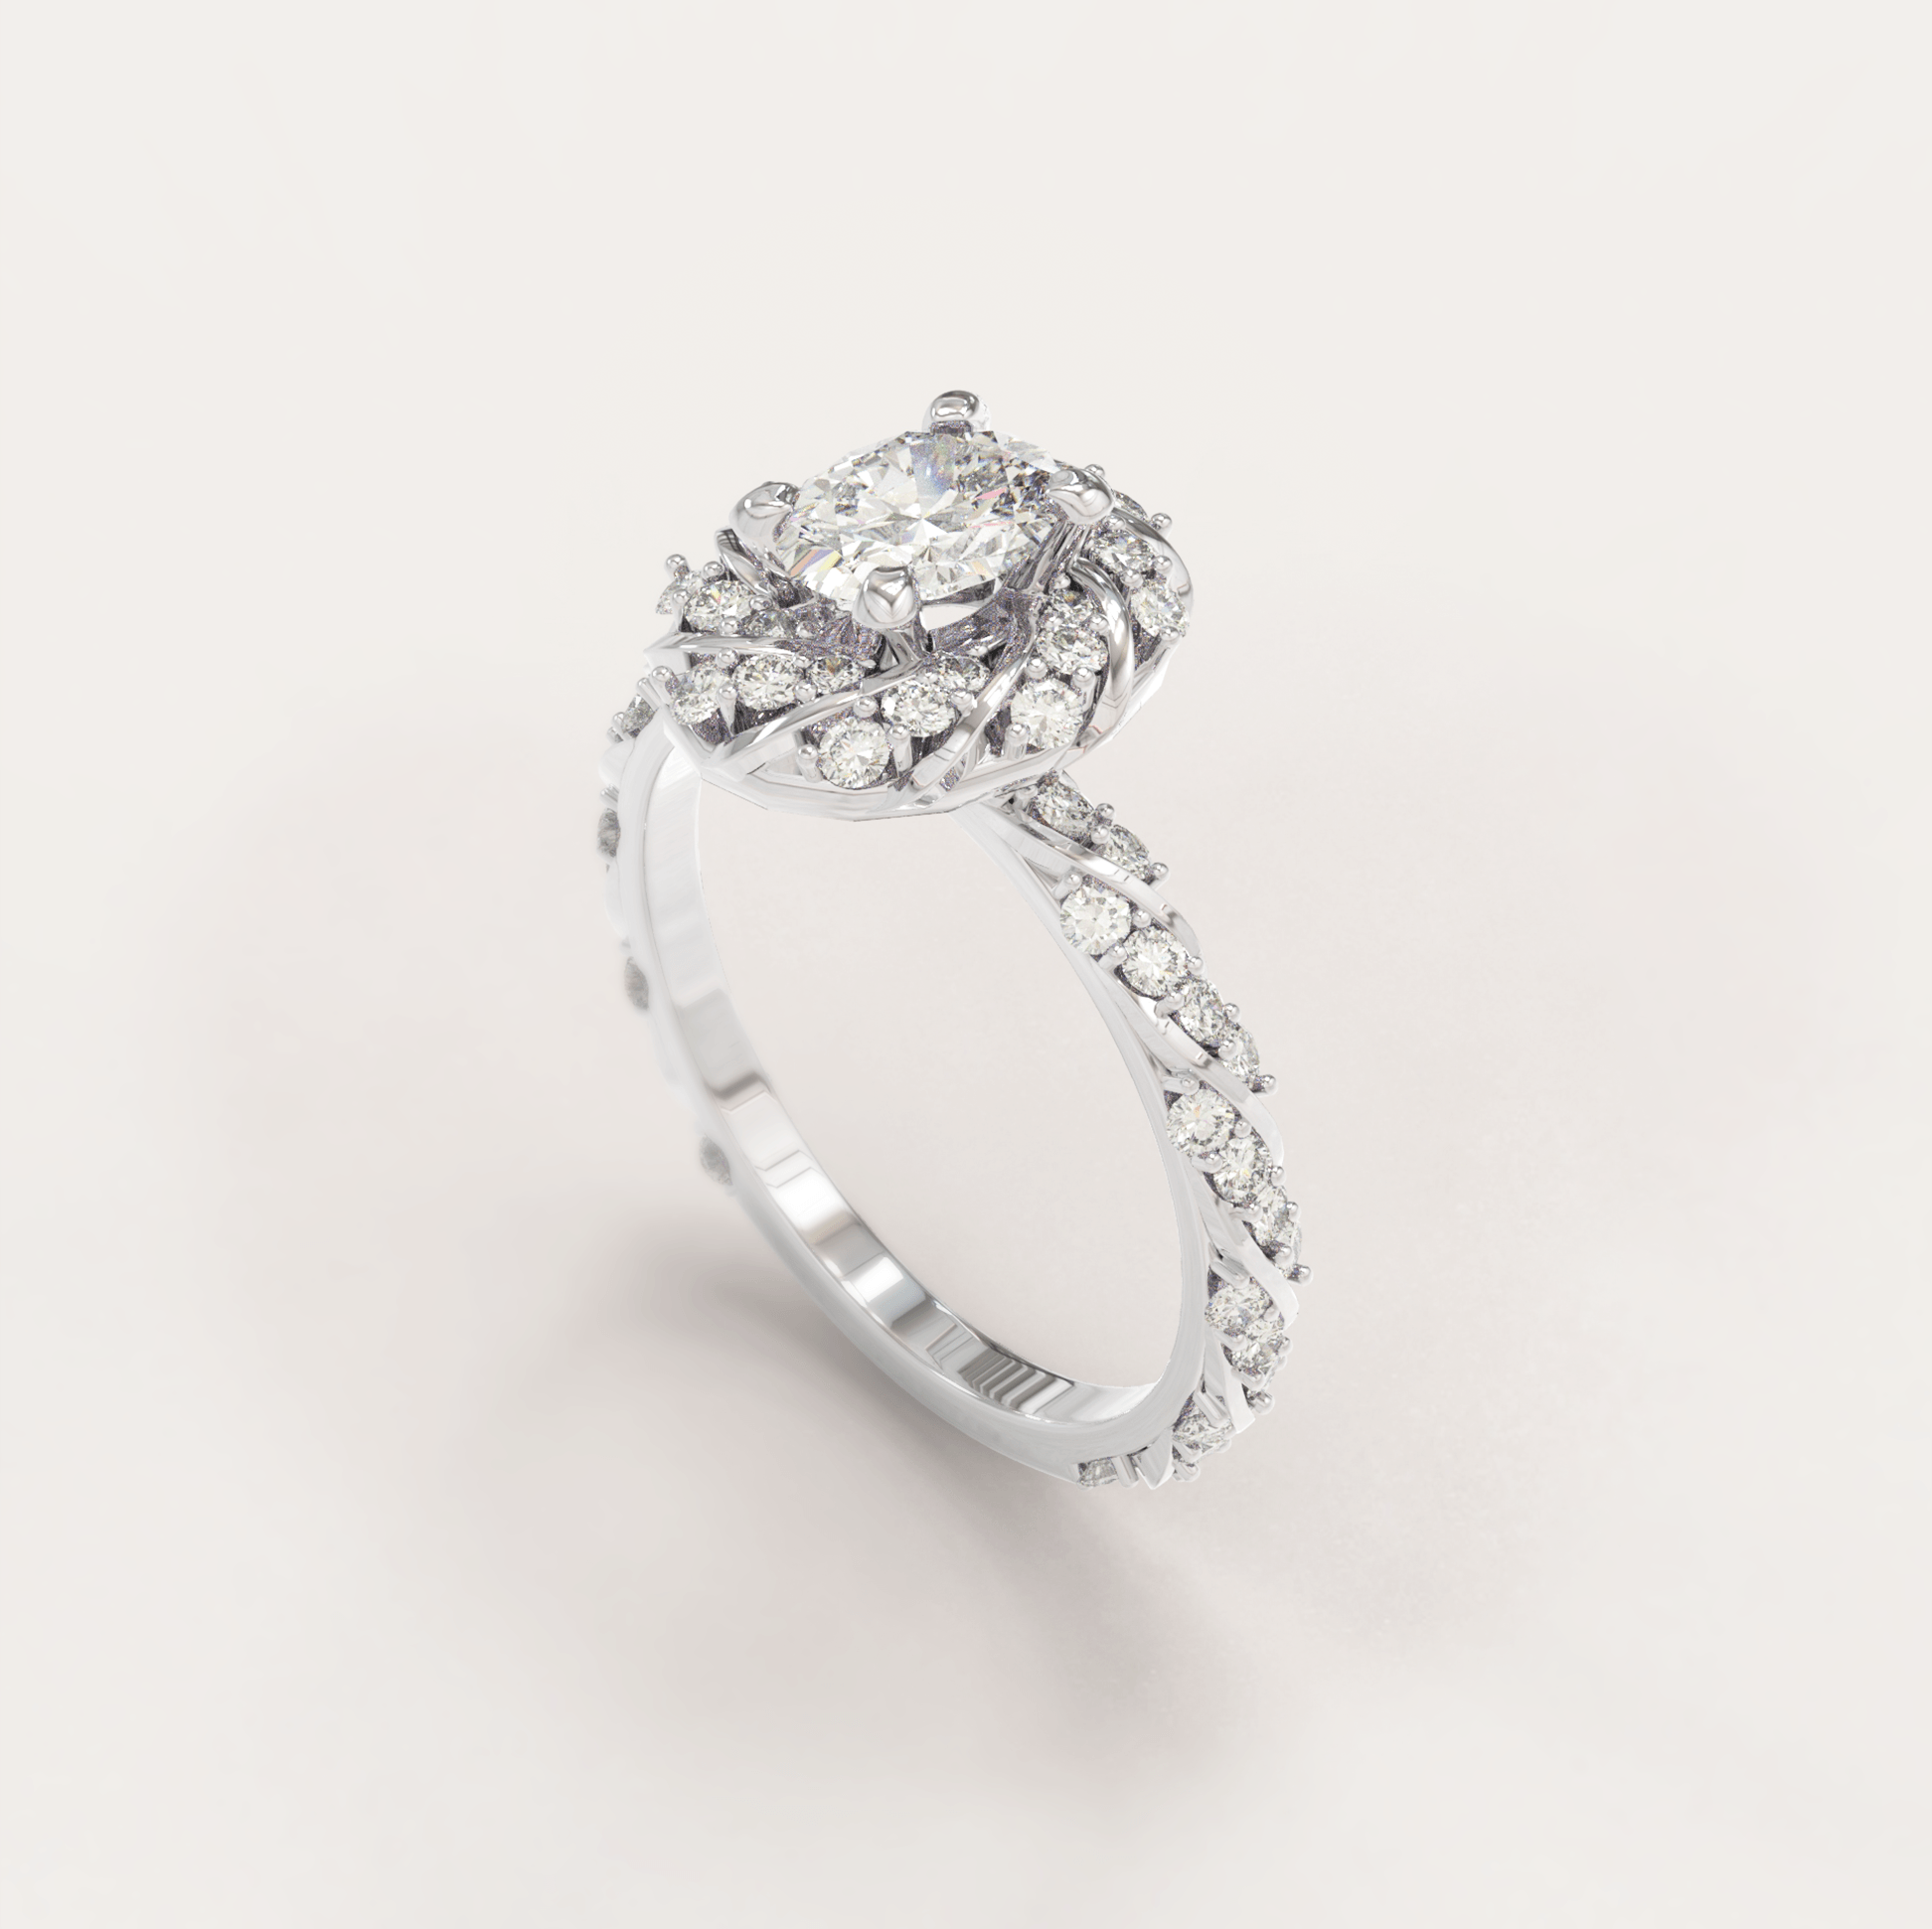 Unique Halo Snowy Princess Engagement Ring No.22 in White Gold - Moissanite/Diamond with CZ - Roelavi